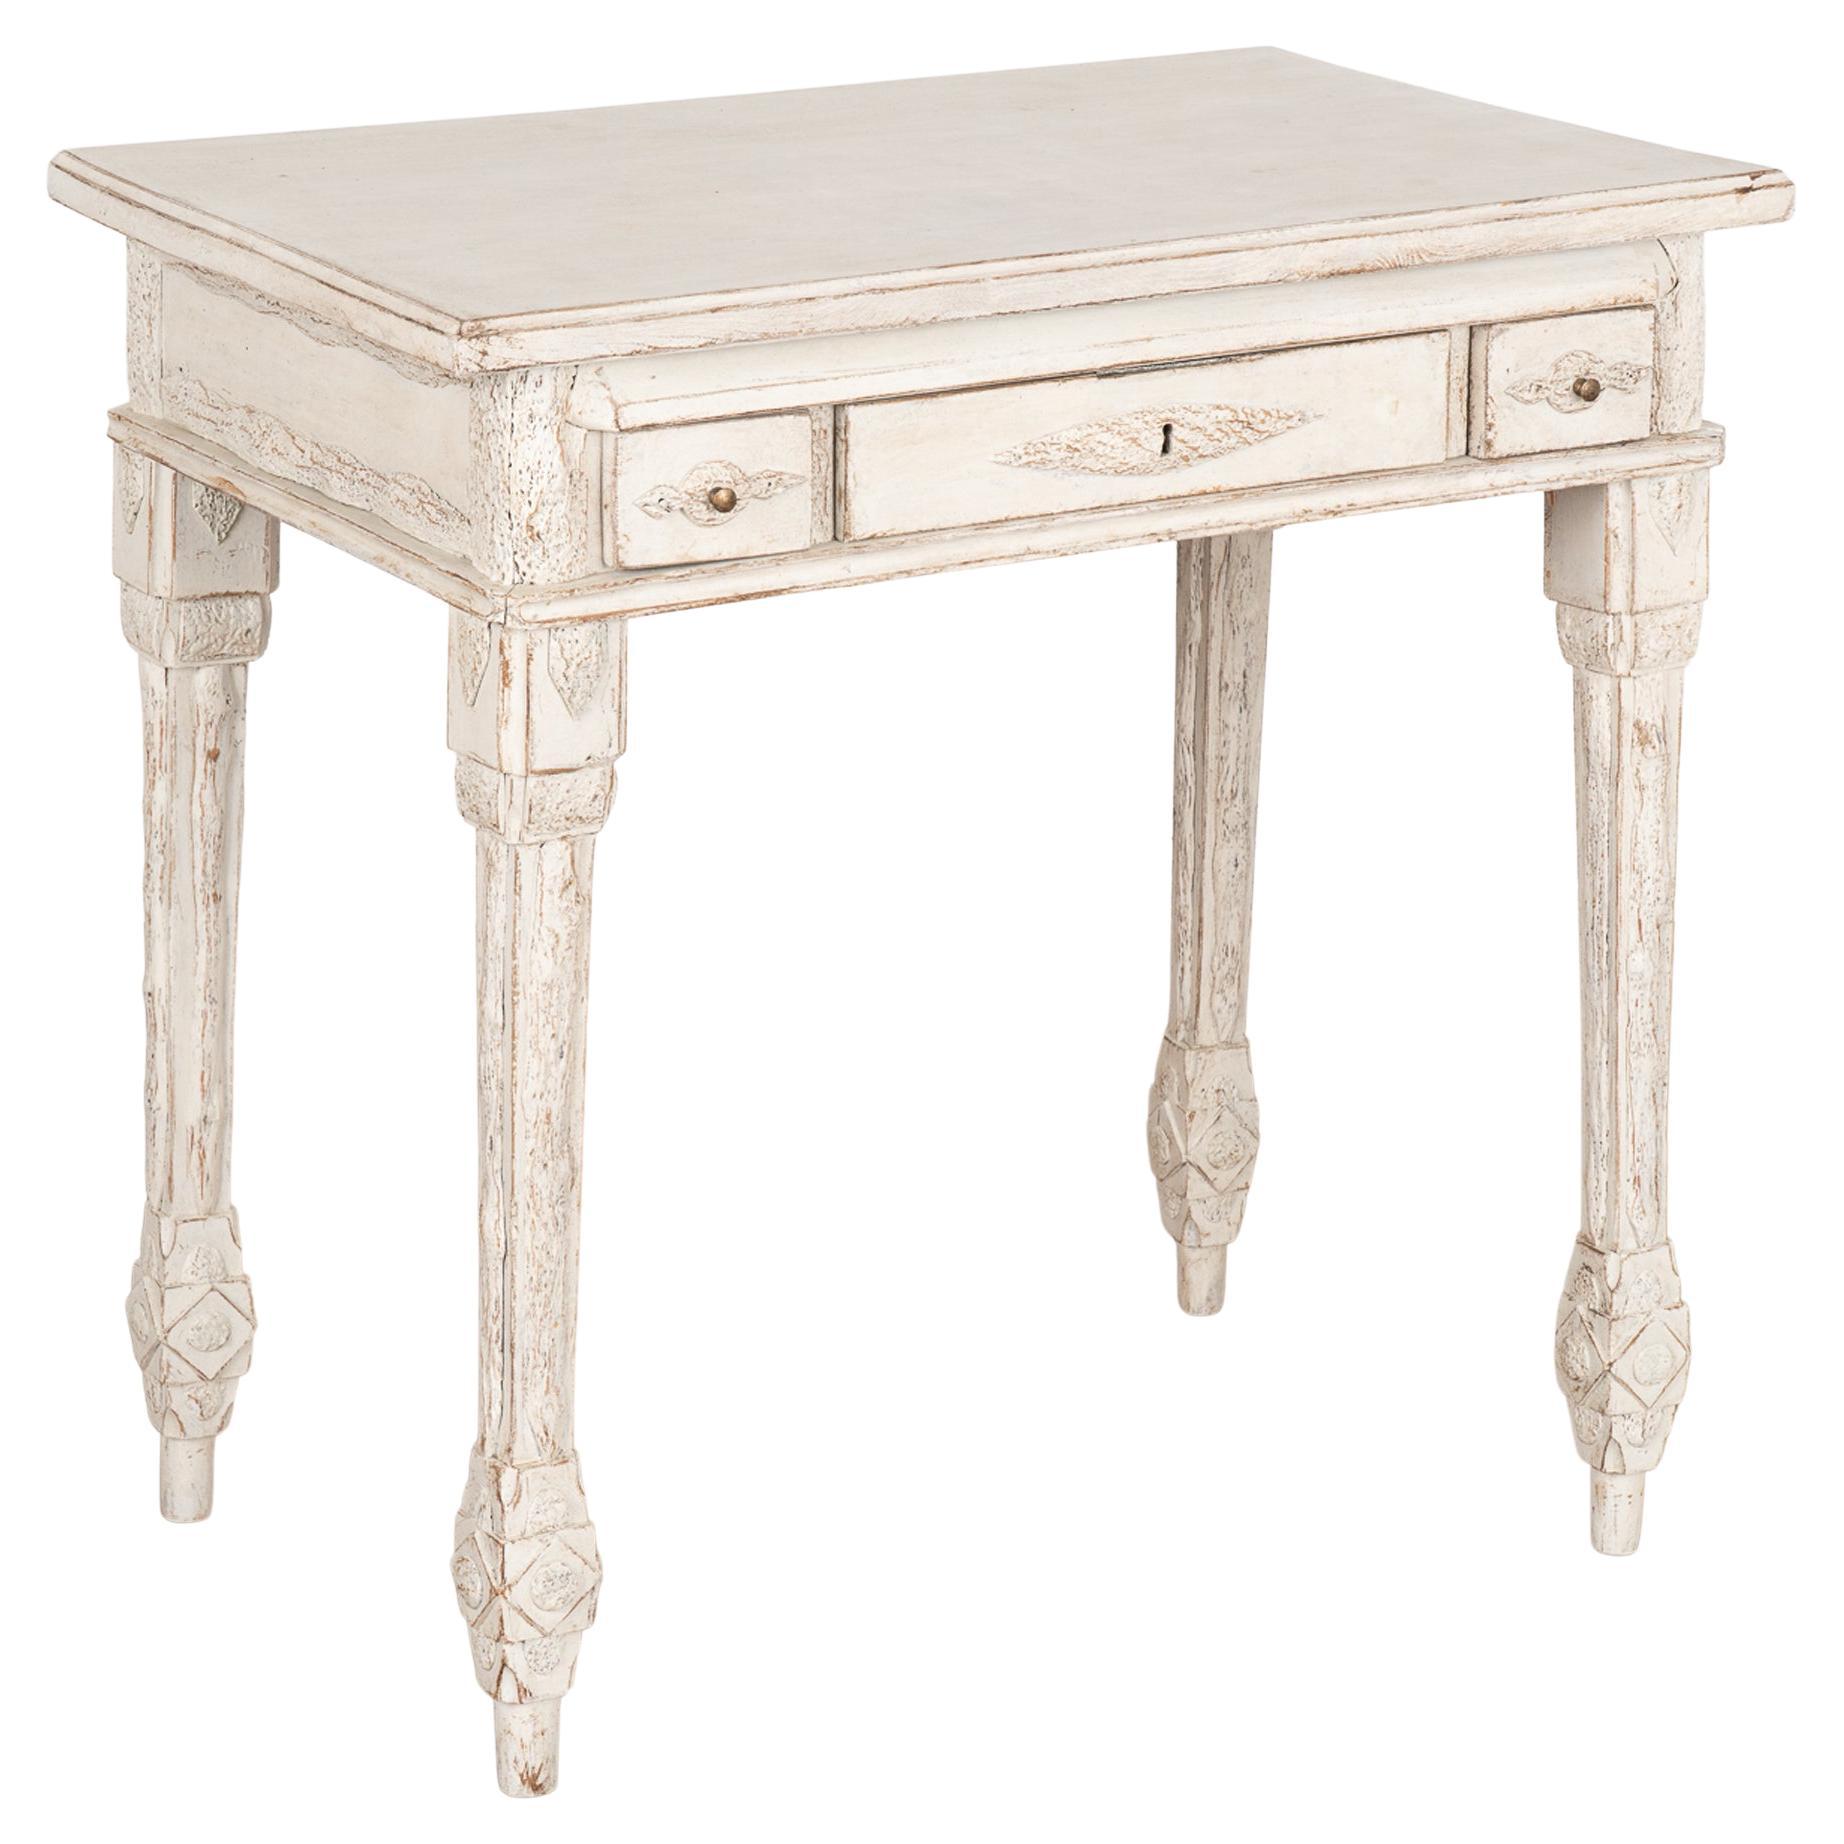 White Painted Small Side Table With Three Drawers, Sweden circa 1890 For Sale